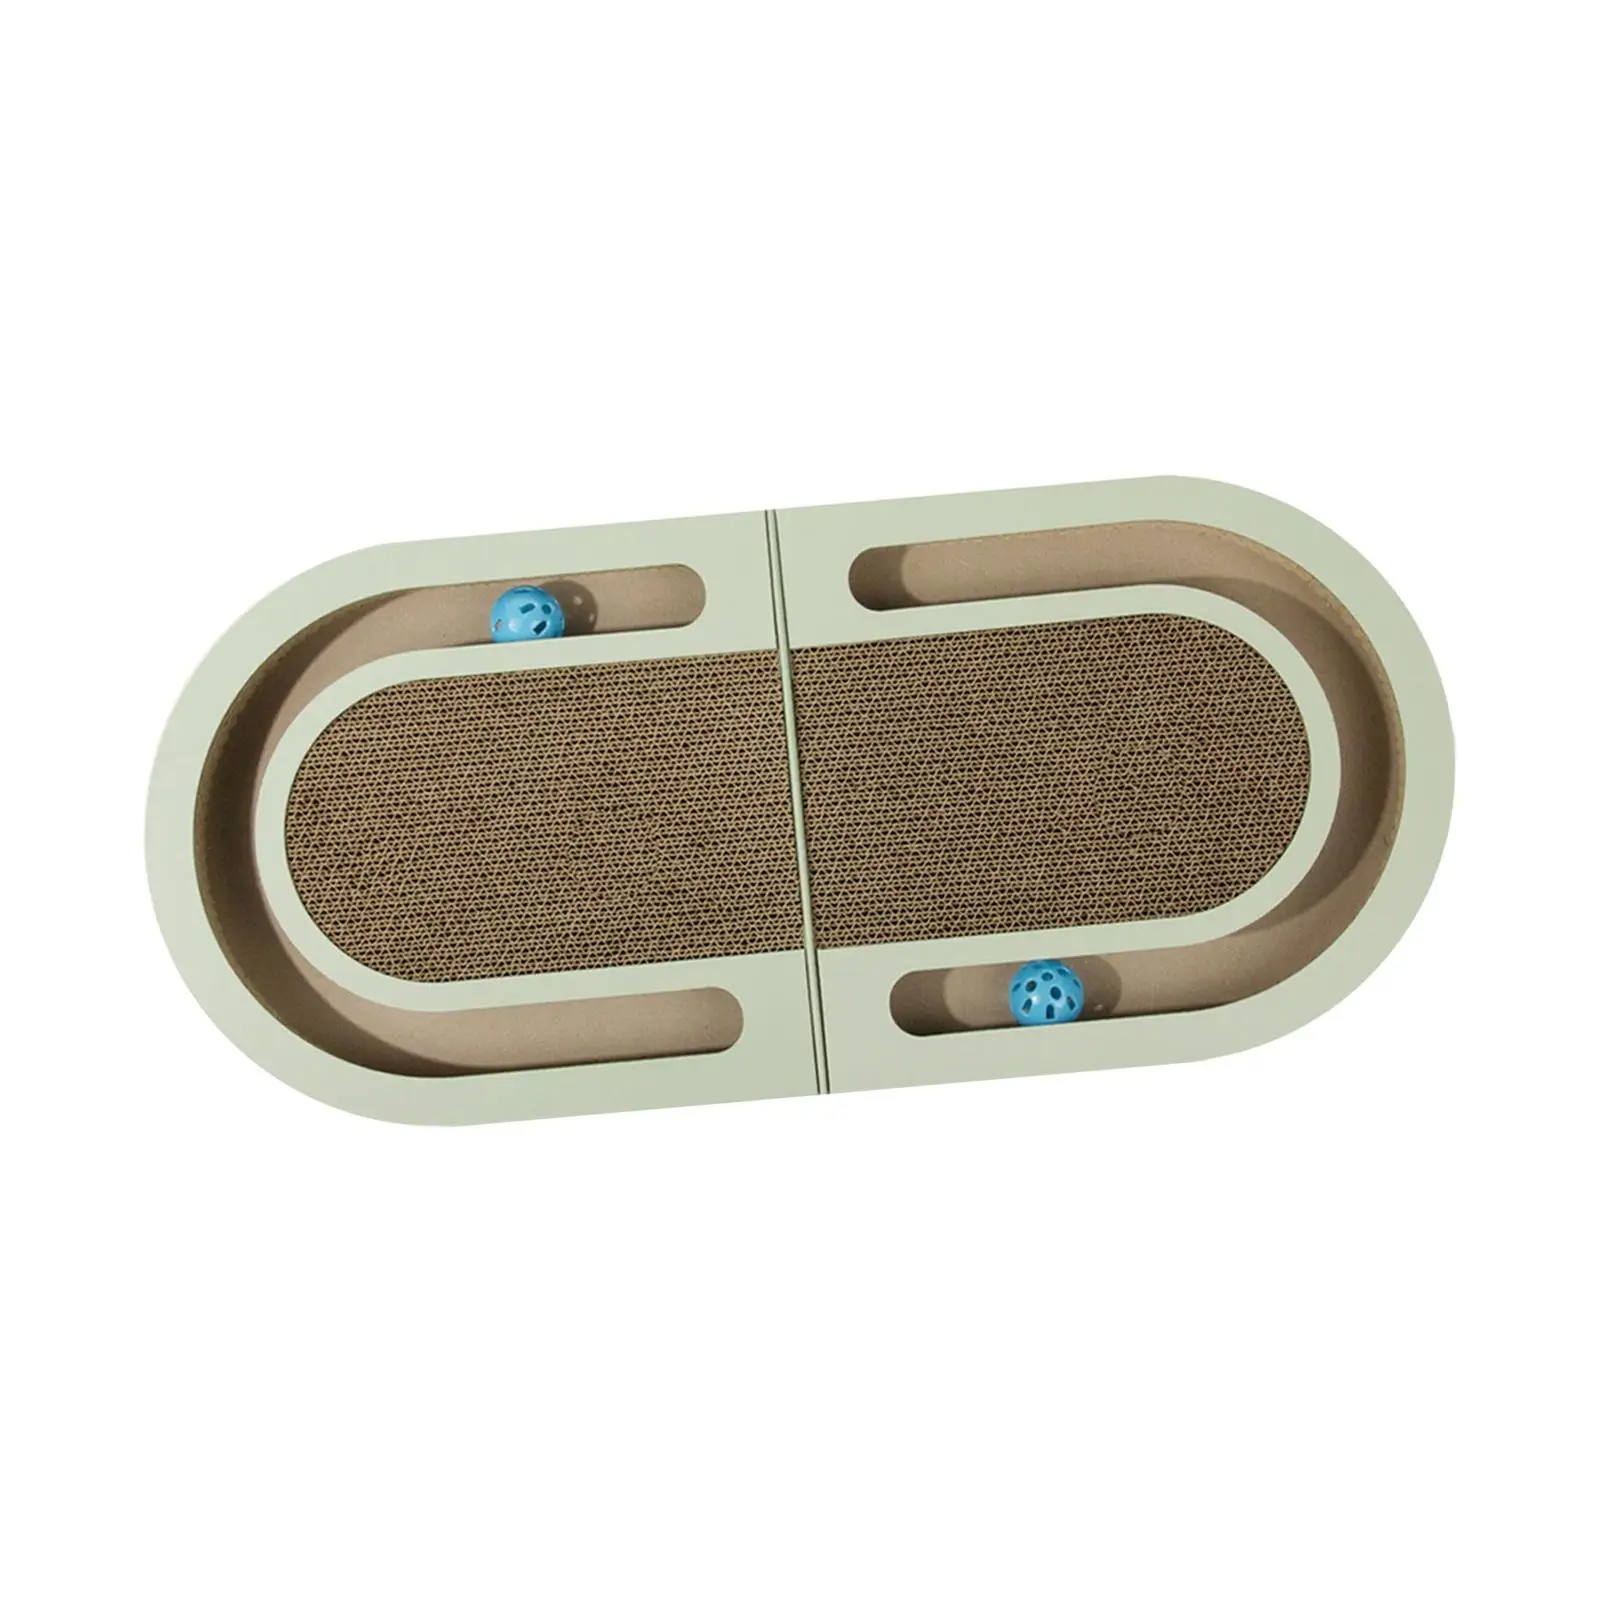 Ball Track Toys Scratching Board Couch Scratching Lounge Bed Cat Scratcher Cardboard for Small Medium Large Cats Kitten Sleeping